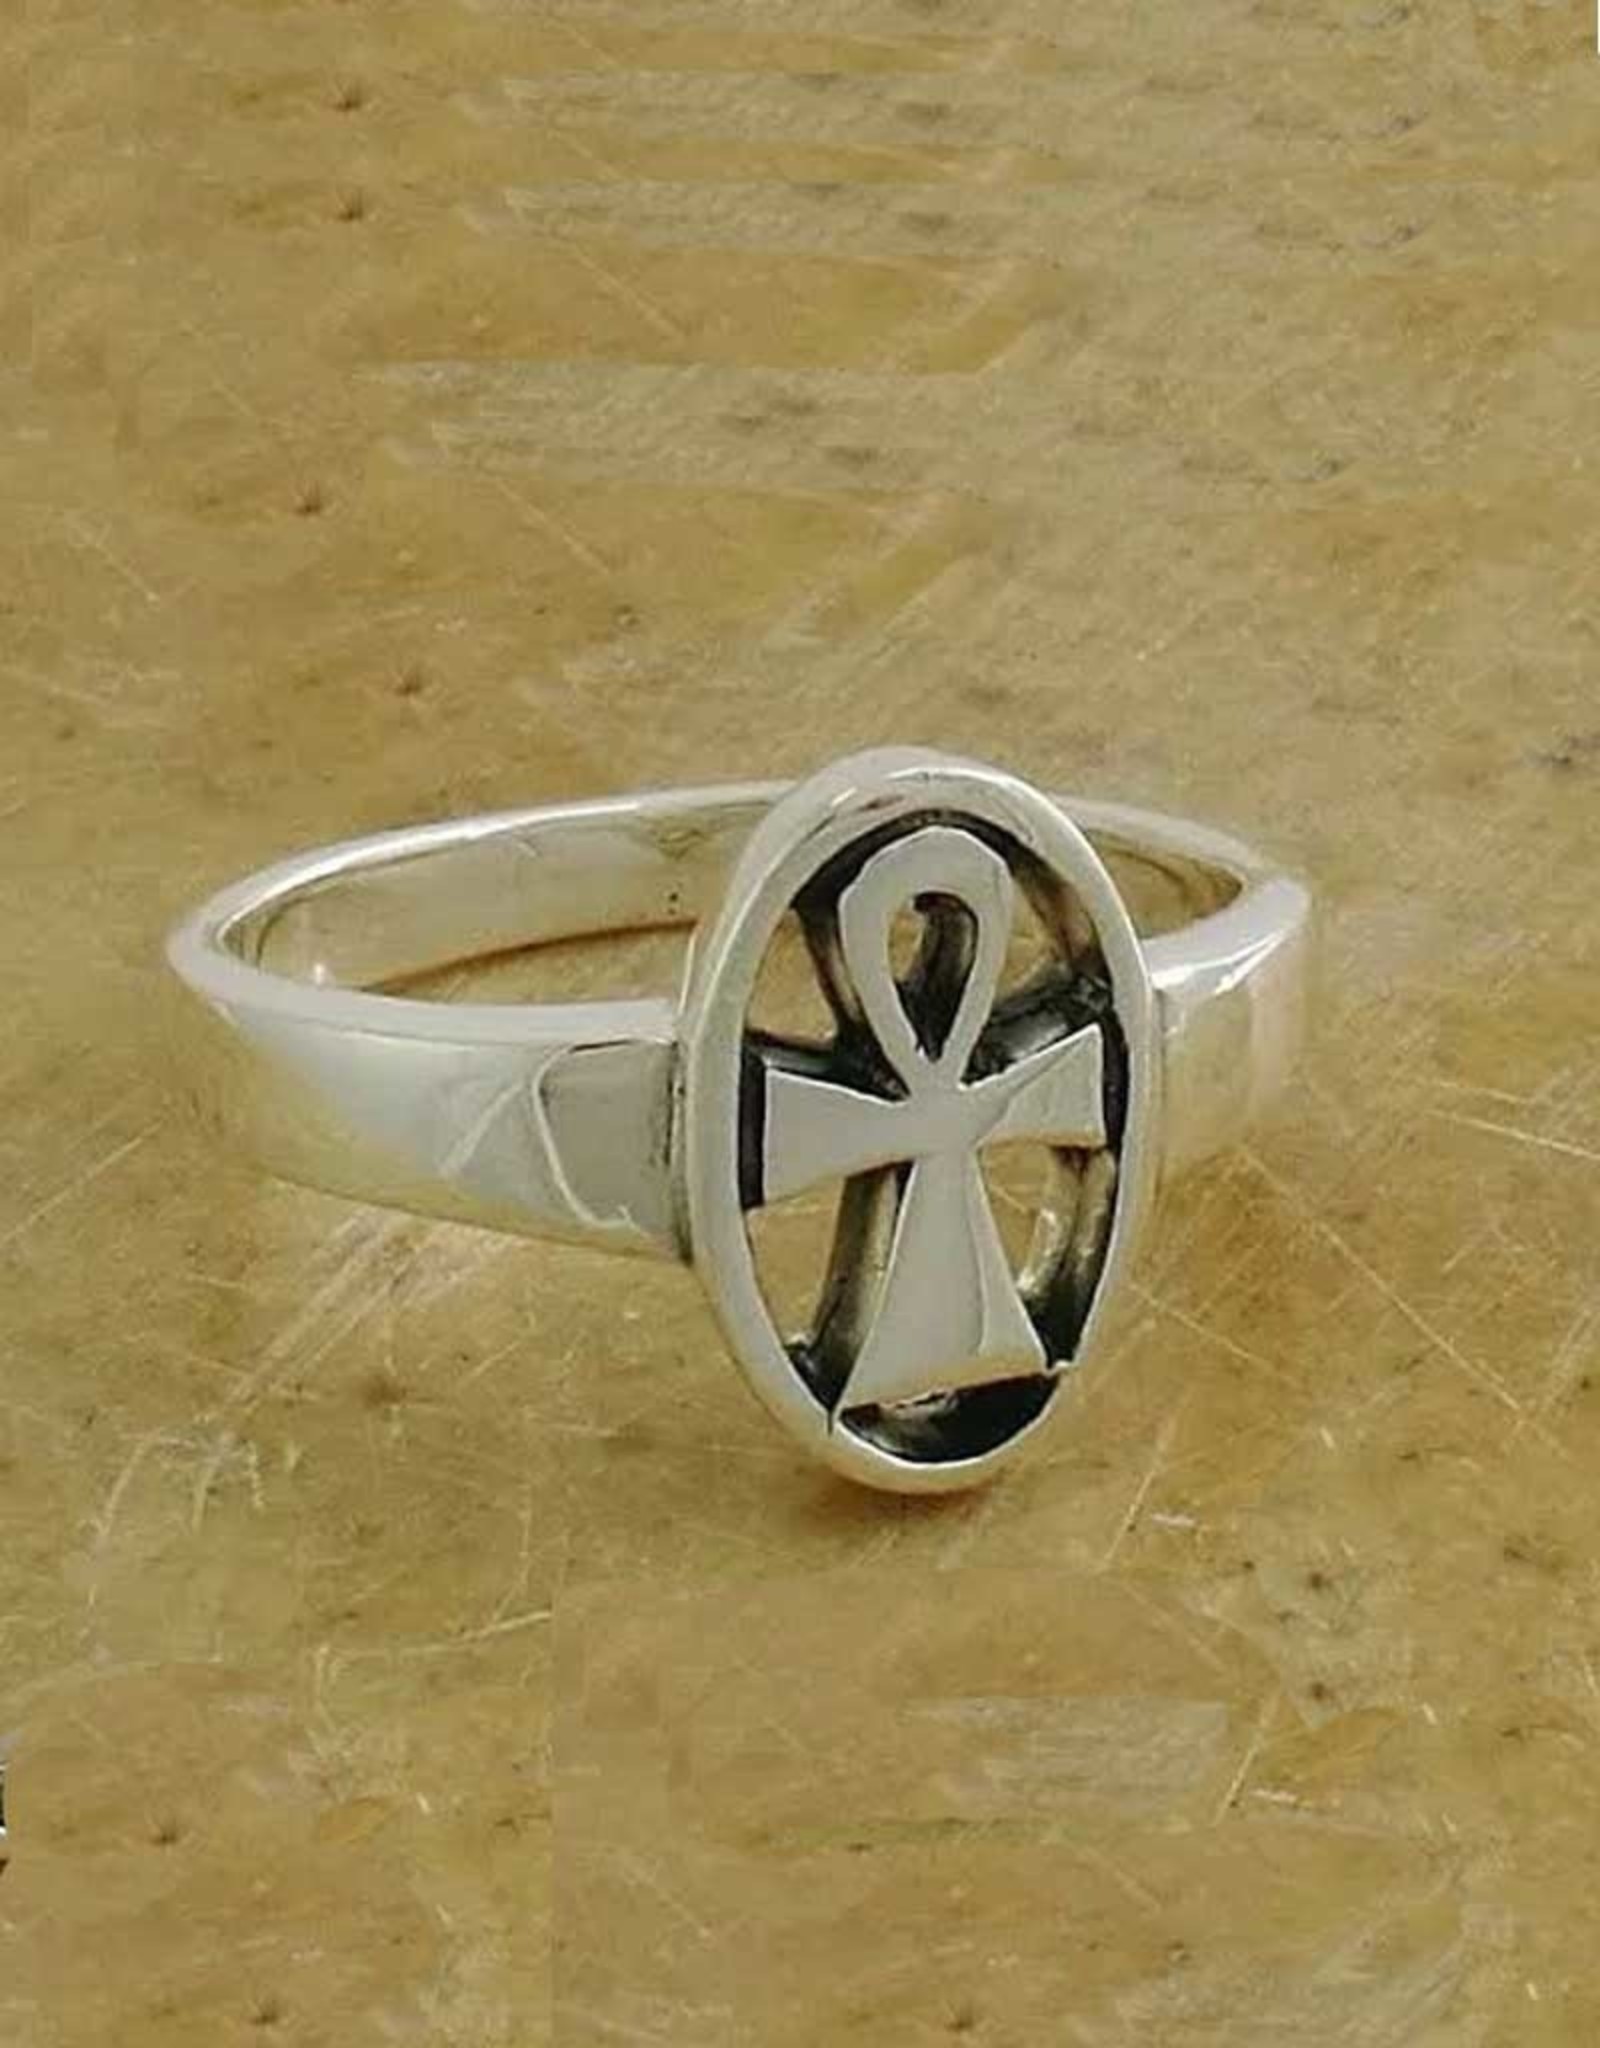 Ankh Ring - Size 9 Sterling Silver